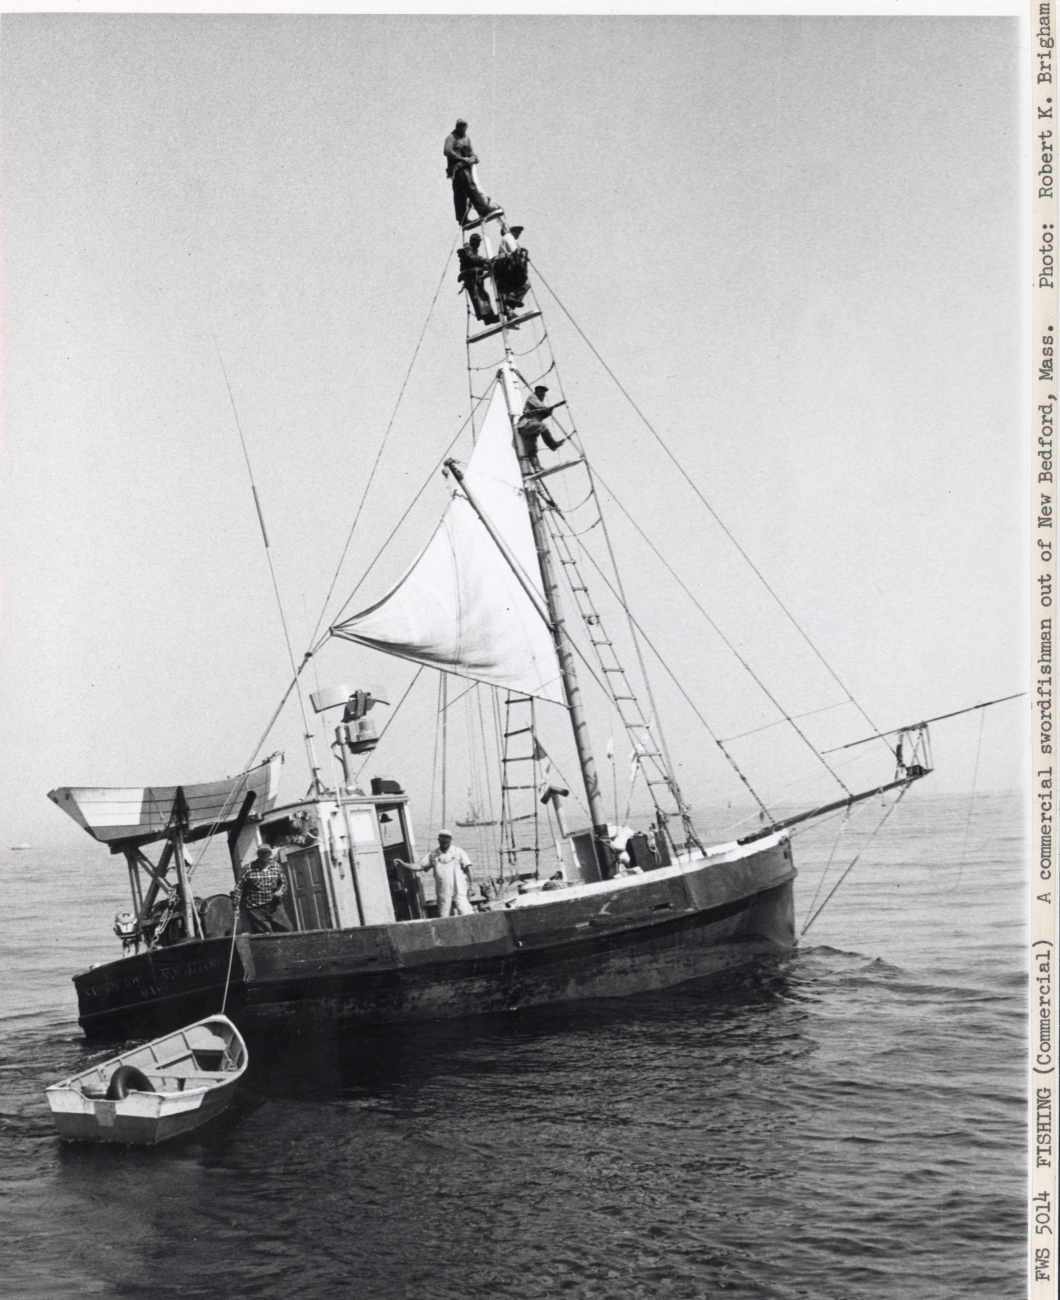 A commercial swordfishing boat out of New Bedford